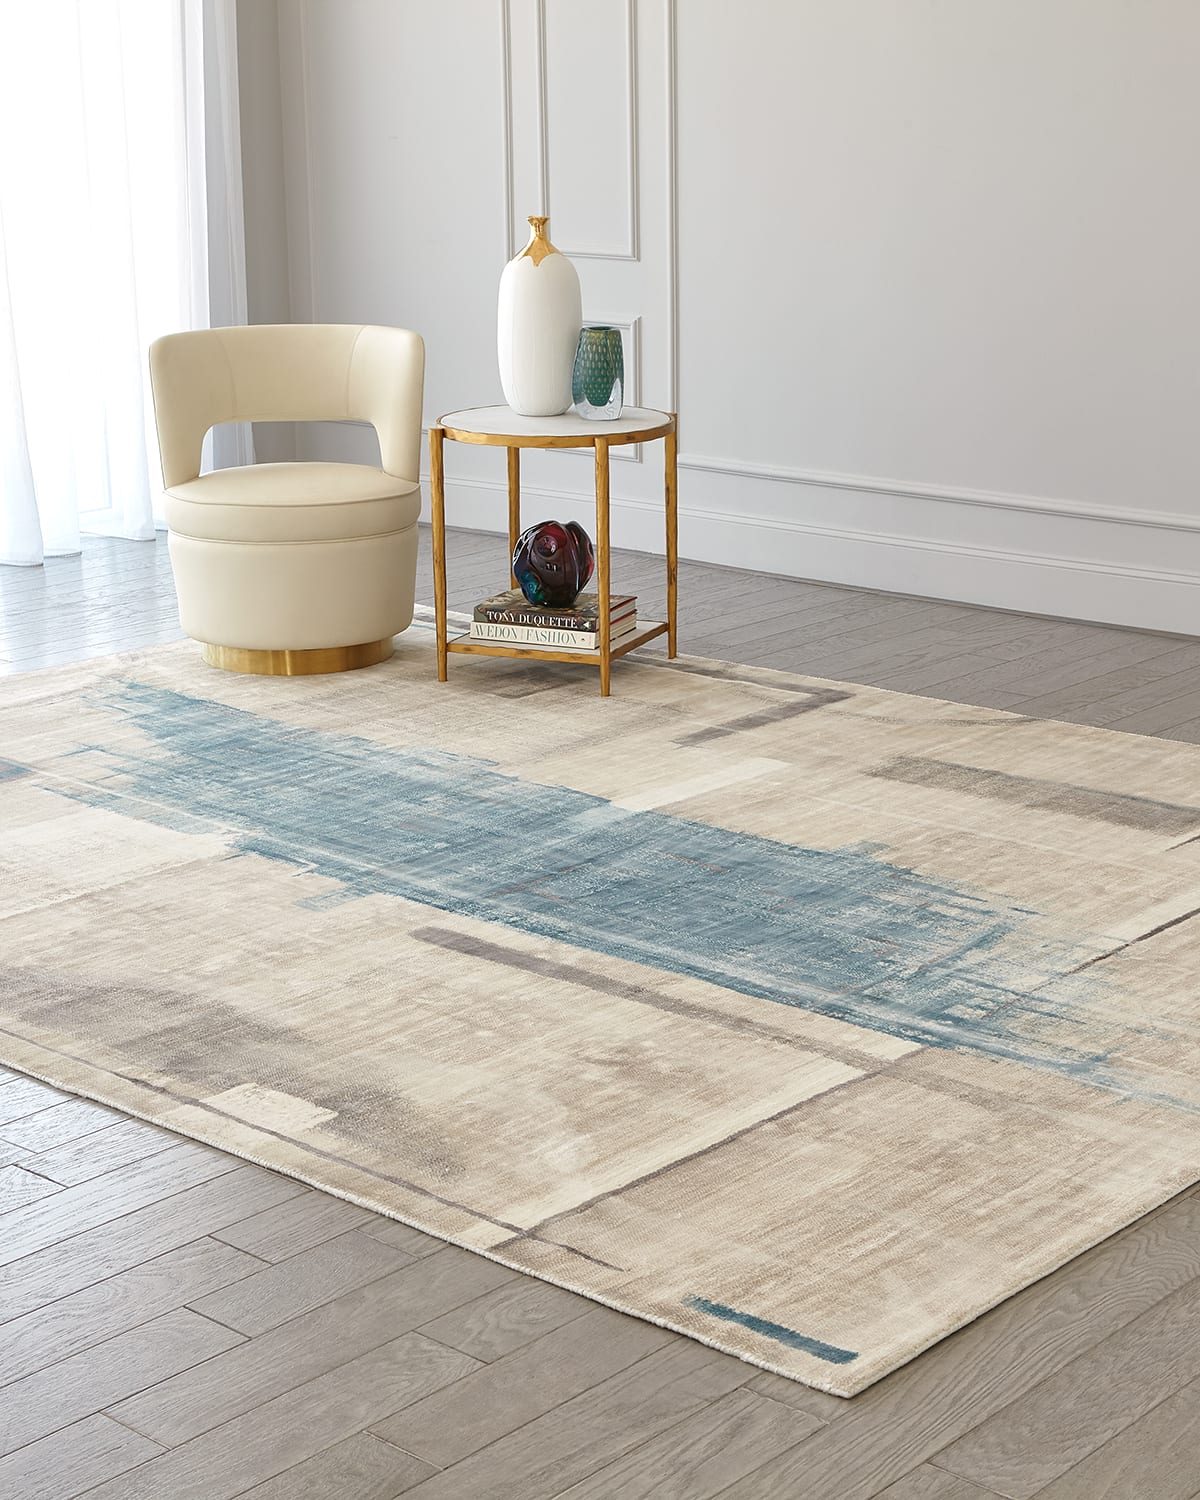 George Sellers For Global Views Art Hand-woven Rug, 10' X 14' In Blue